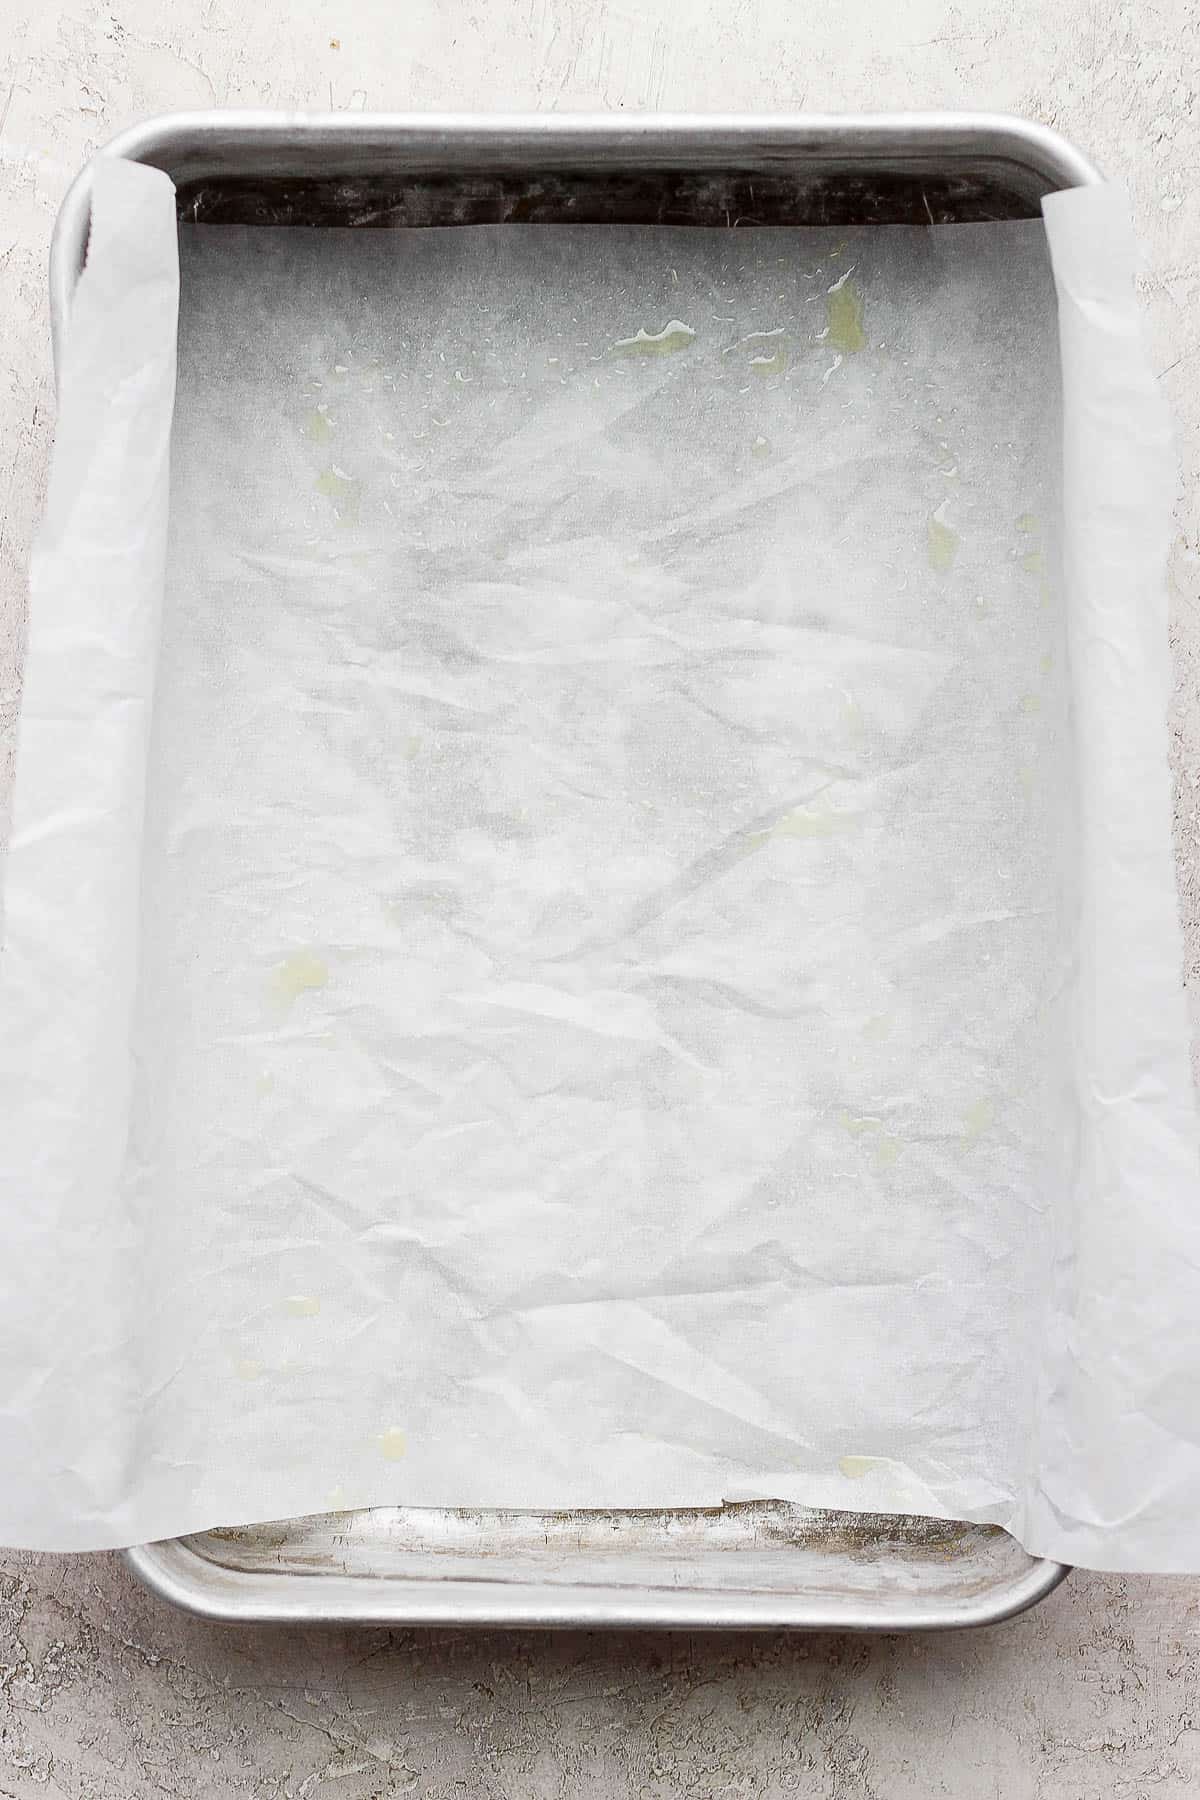 A metal baking pan with parchment paper that has been sprayed with cooking spray.